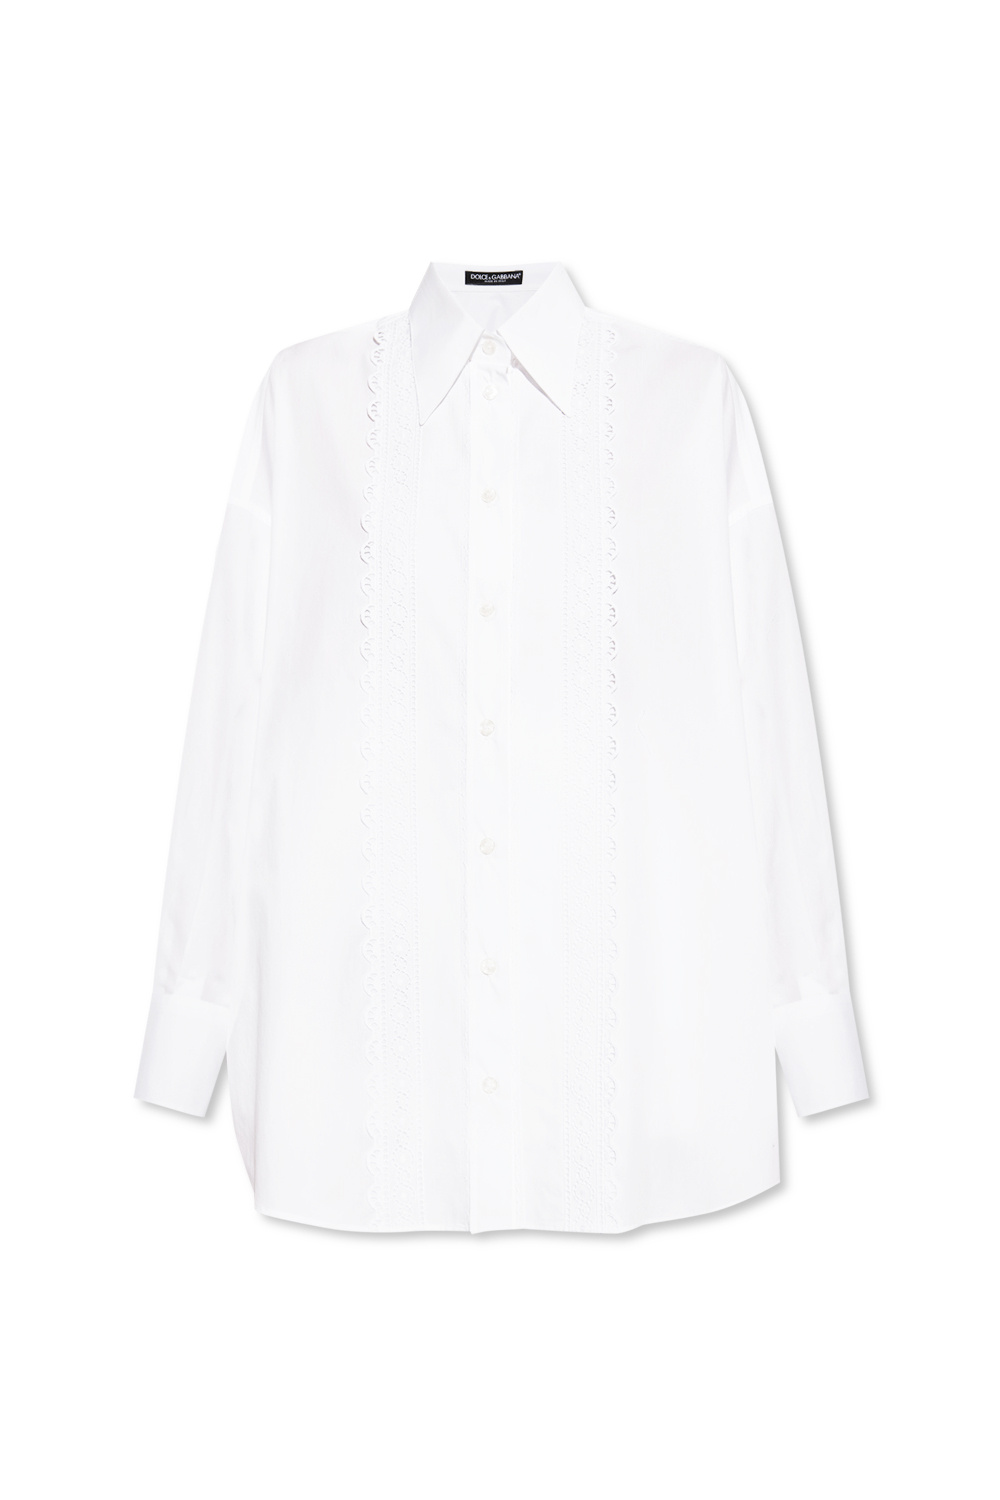 Dolce & Gabbana interlocking DG-plaque loafers Braun Shirt with broderie anglaise detailing